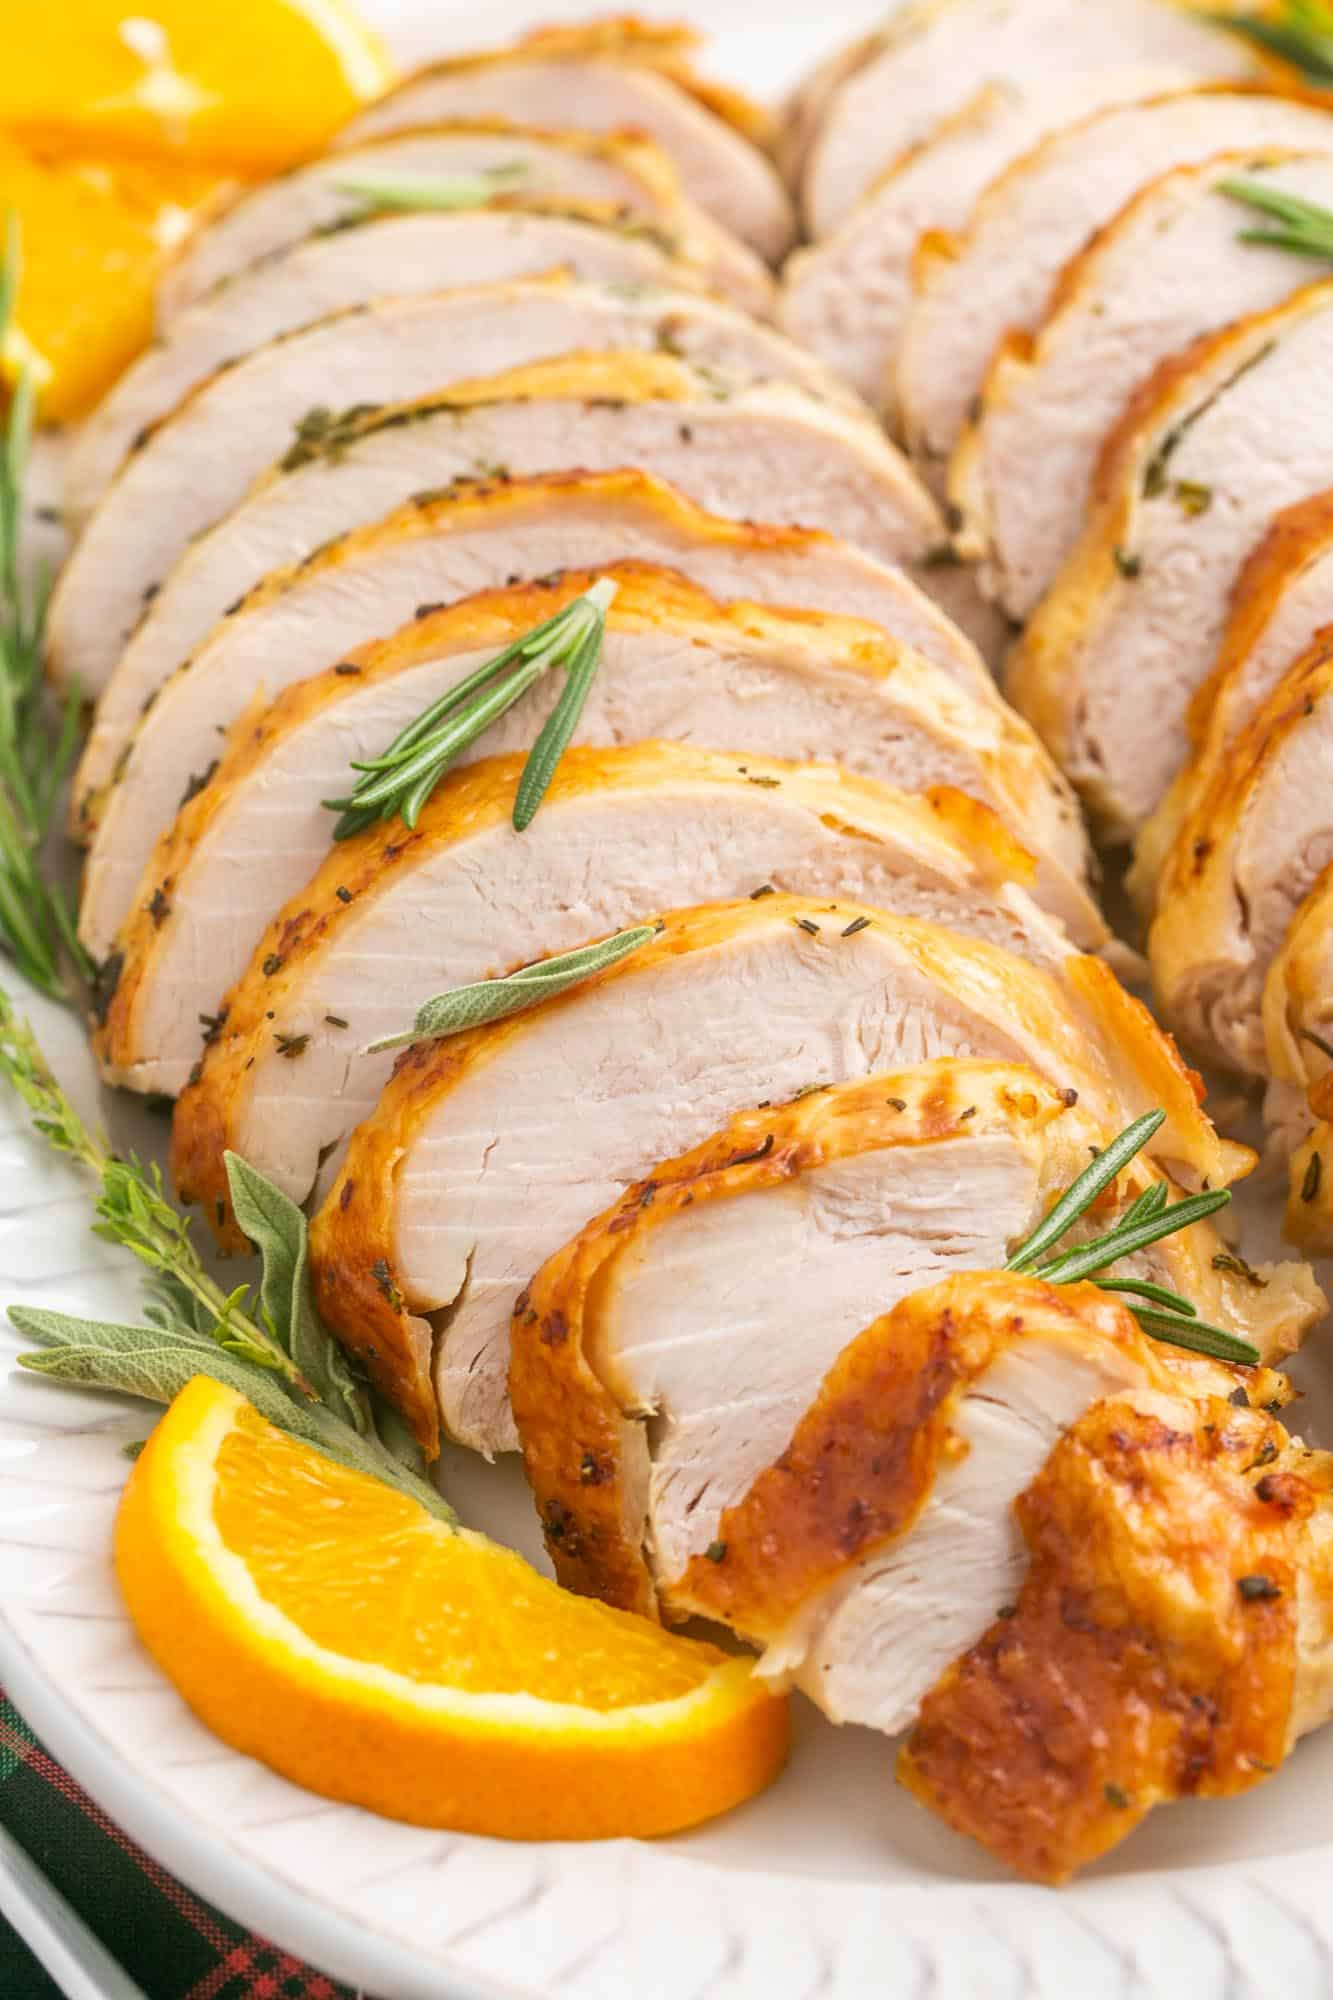 close up view of sliced roast turkey breast with crispy skin, garnished with fresh herbs and oranges.